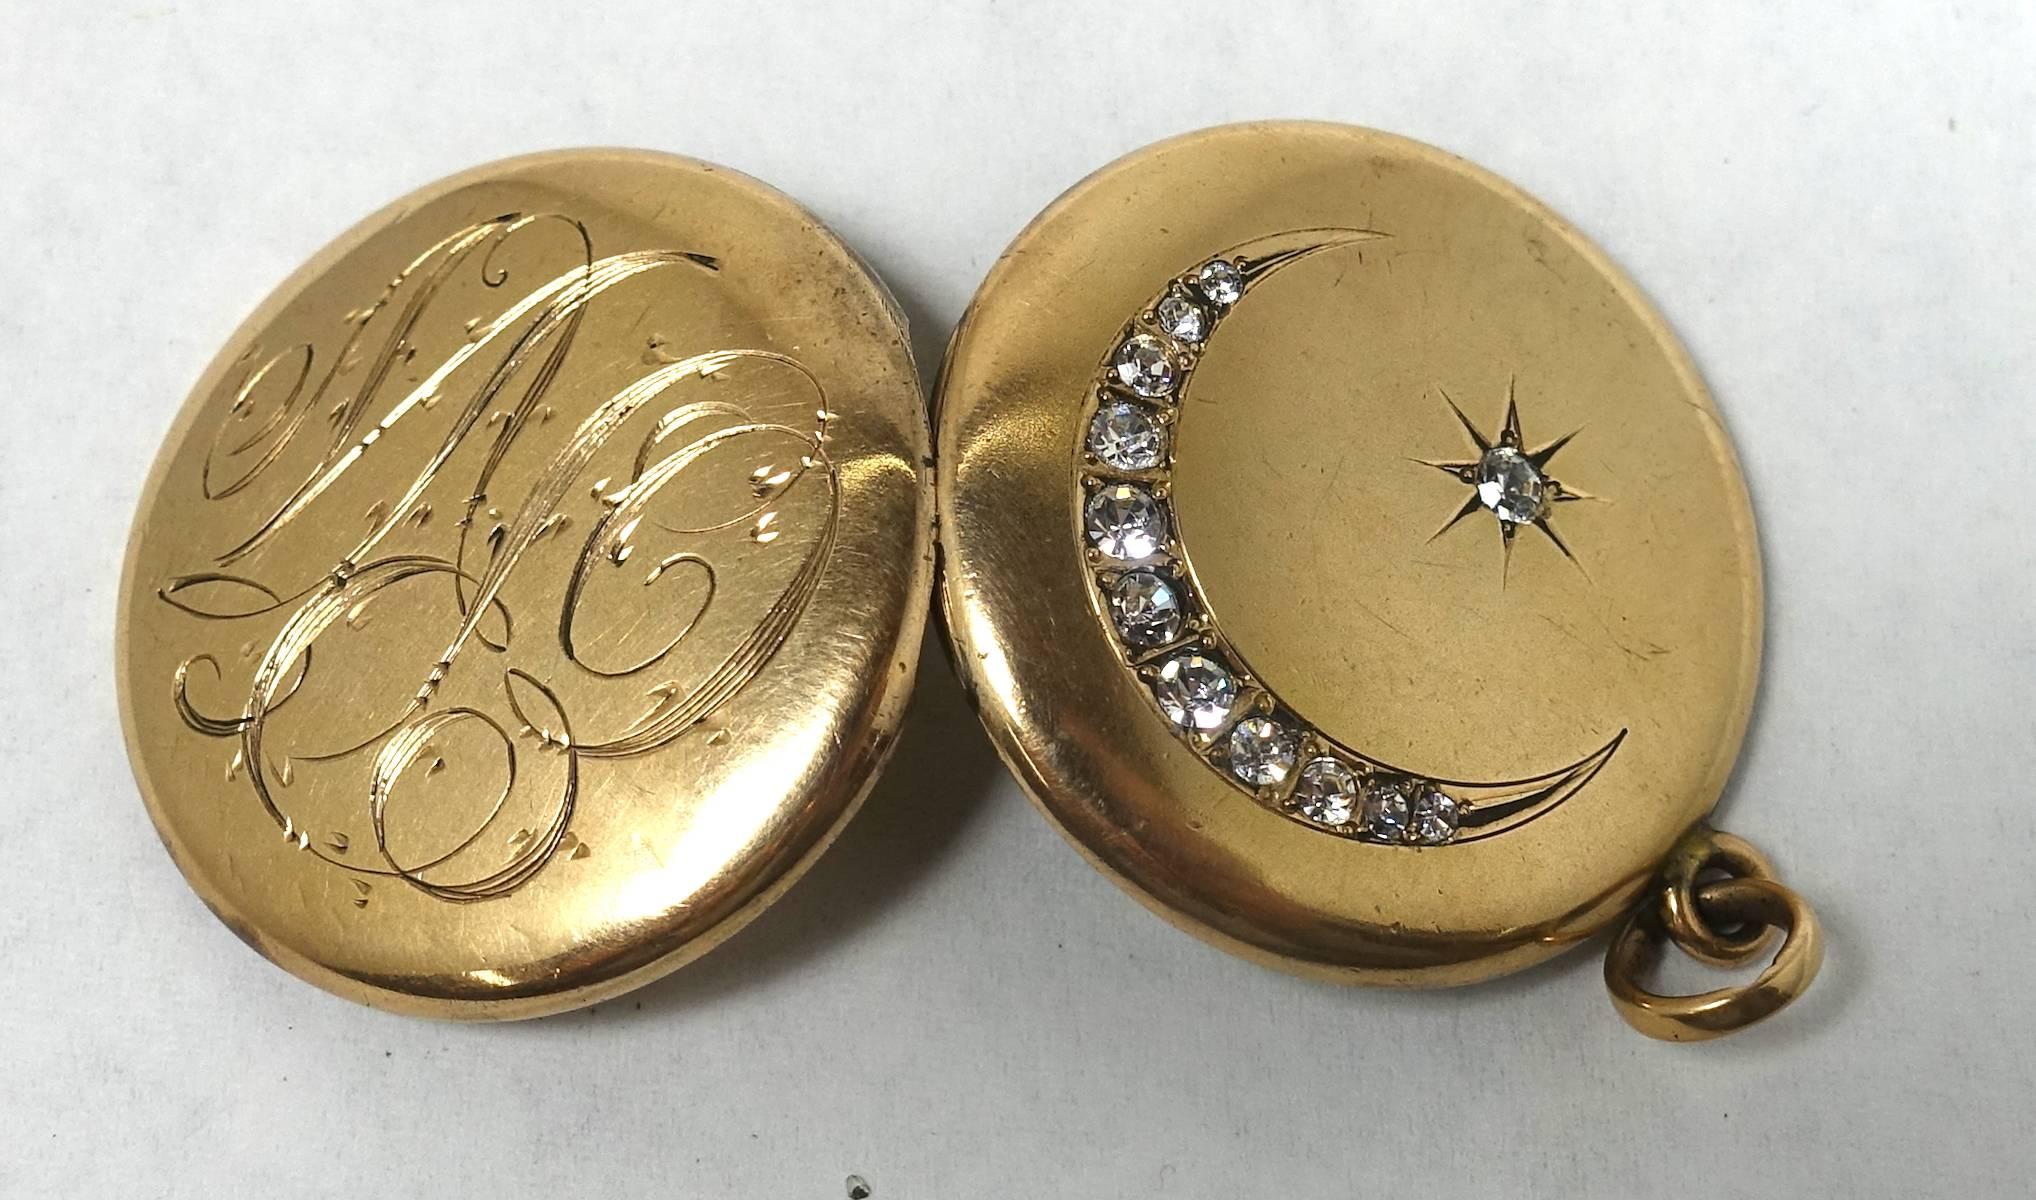 This signed W&M Co. vintage locket features a half moon and star in clear crystals. It is in a gold filled setting.  On the other side, there is an elaborate engraving, which we can’t make out.  This locket measures 1-1/8” in diameter and is signed